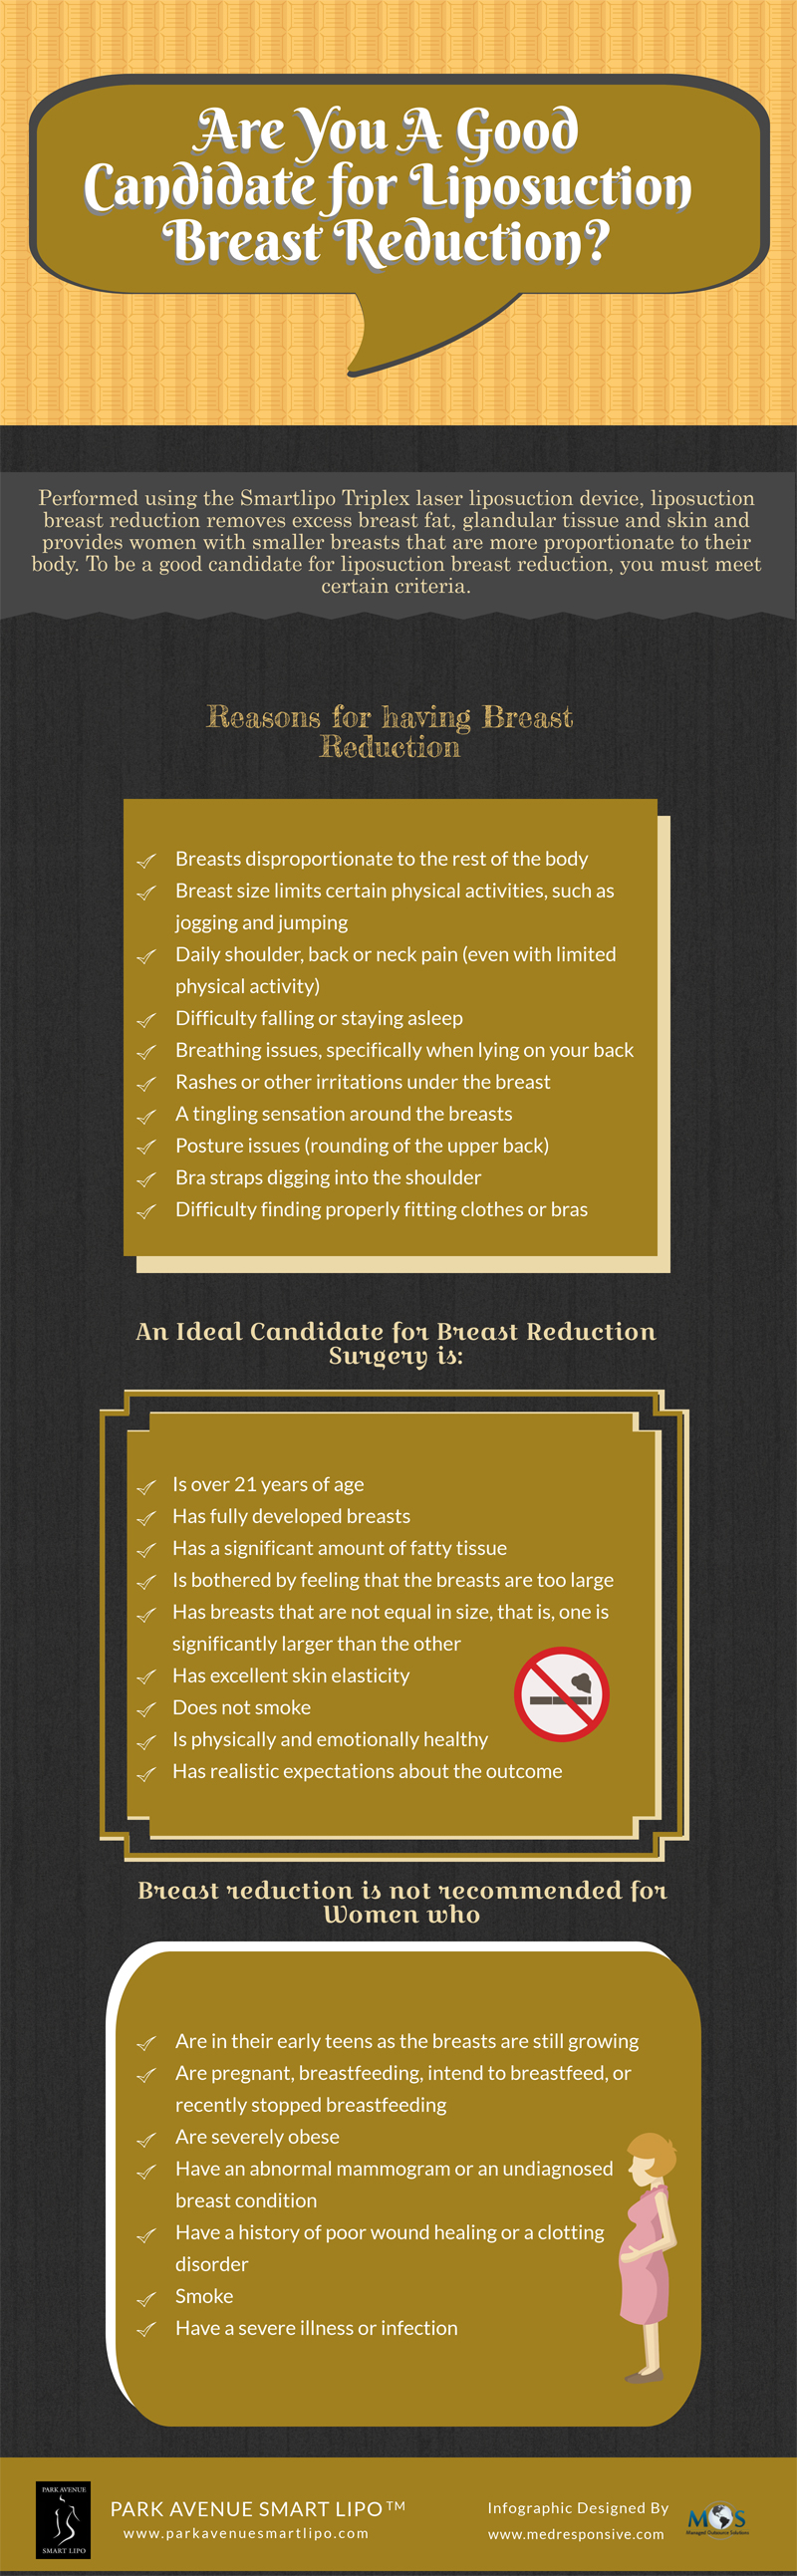 Are You A Good Candidate for Liposuction Breast Reduction?  [Infographics]